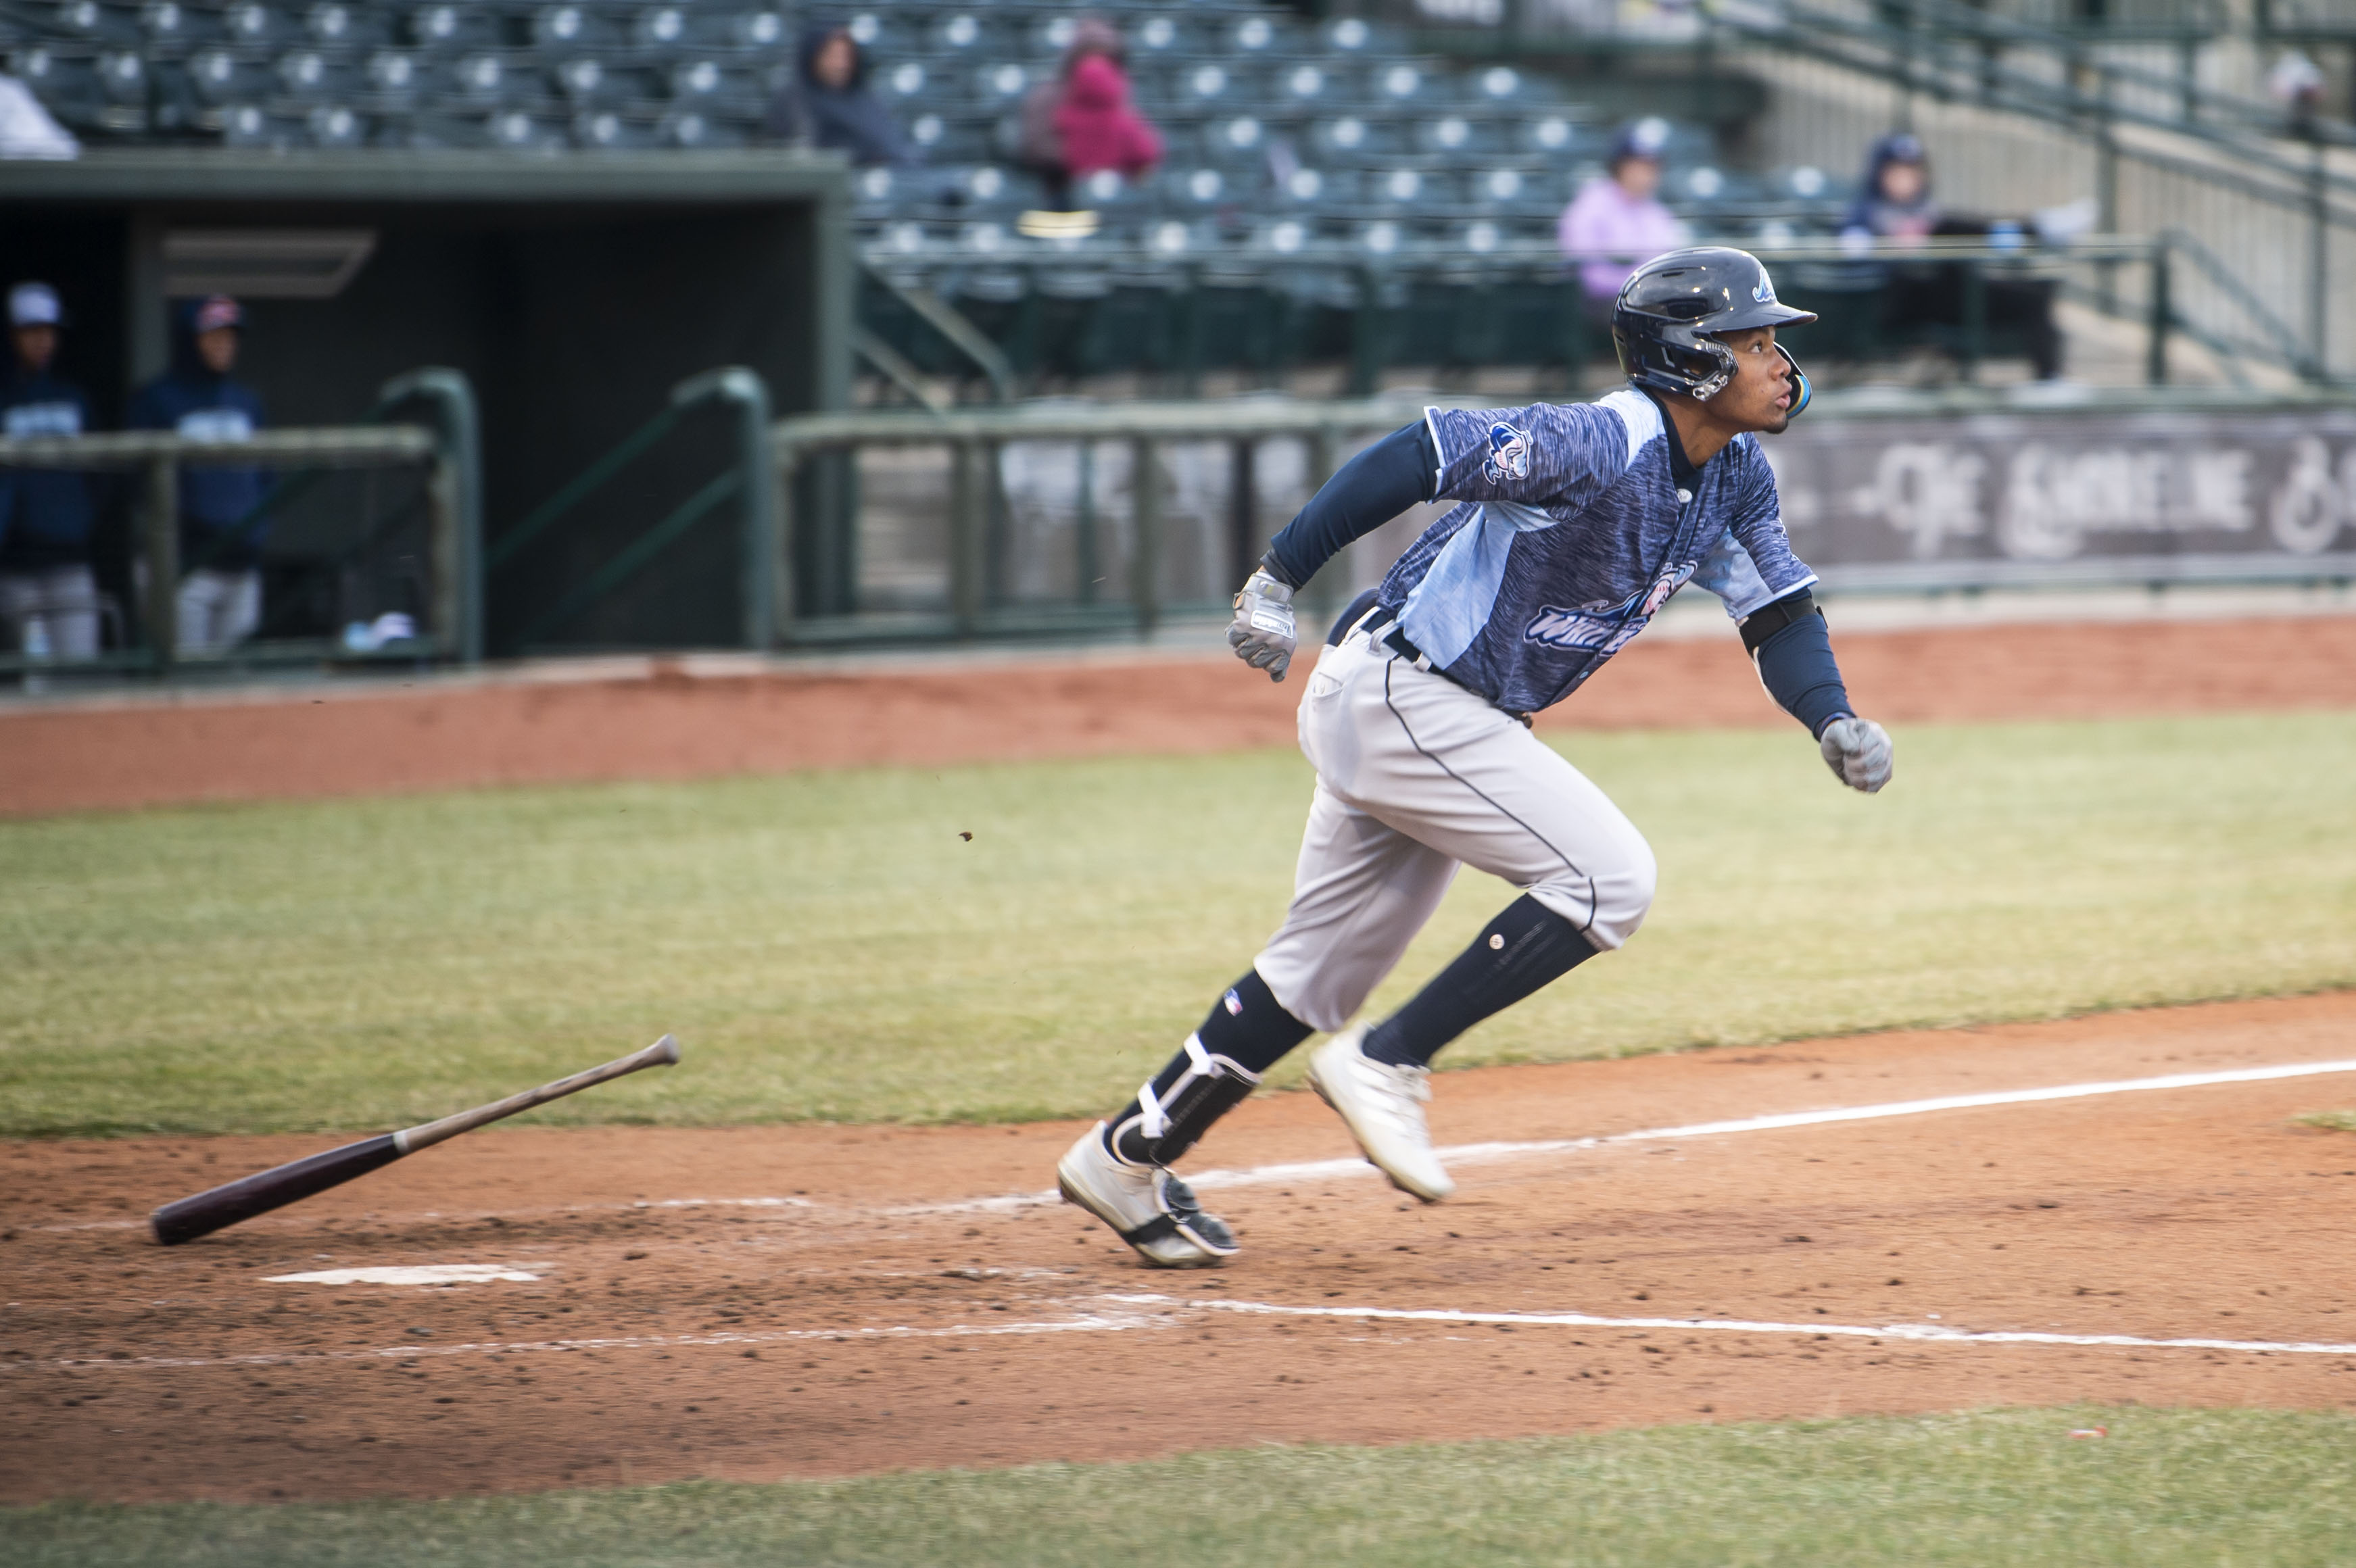 Whitecaps face the South Bend Cubs on Wednesday